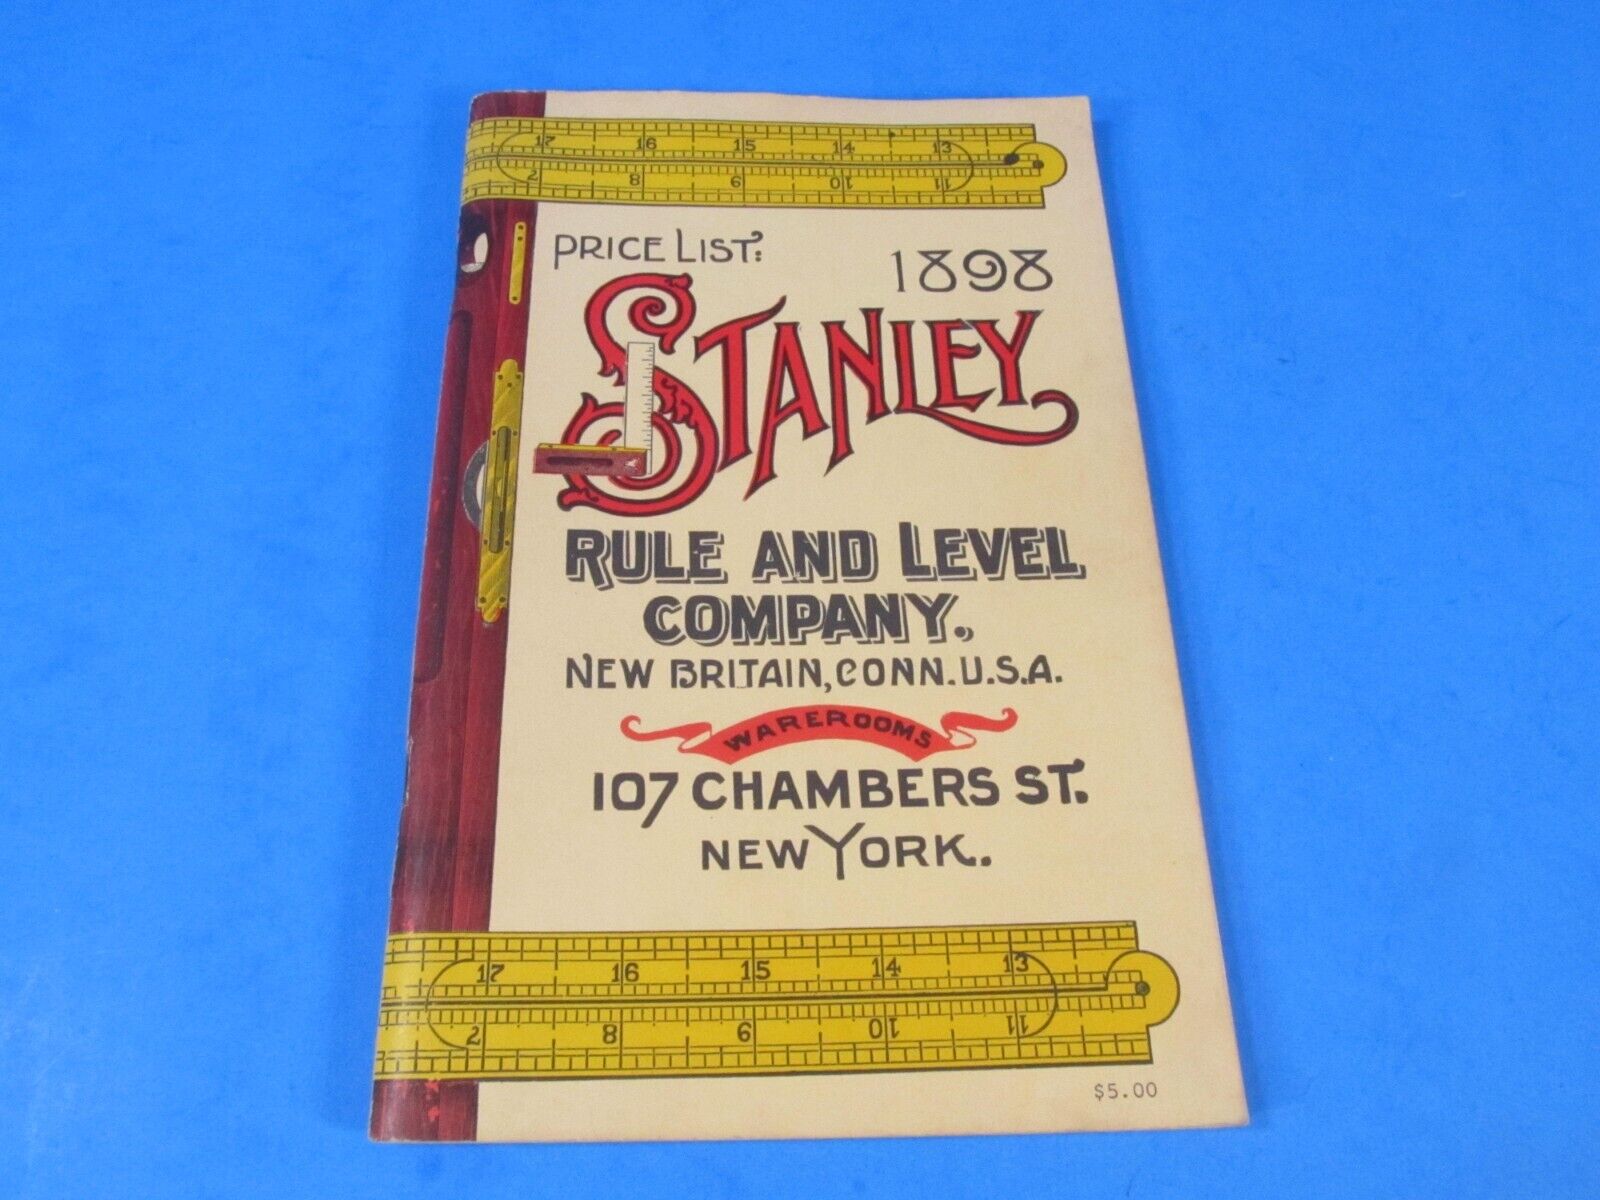 1975 Ken Roberts reprint of 1898 Stanley Rule & Level catalog planes color pages